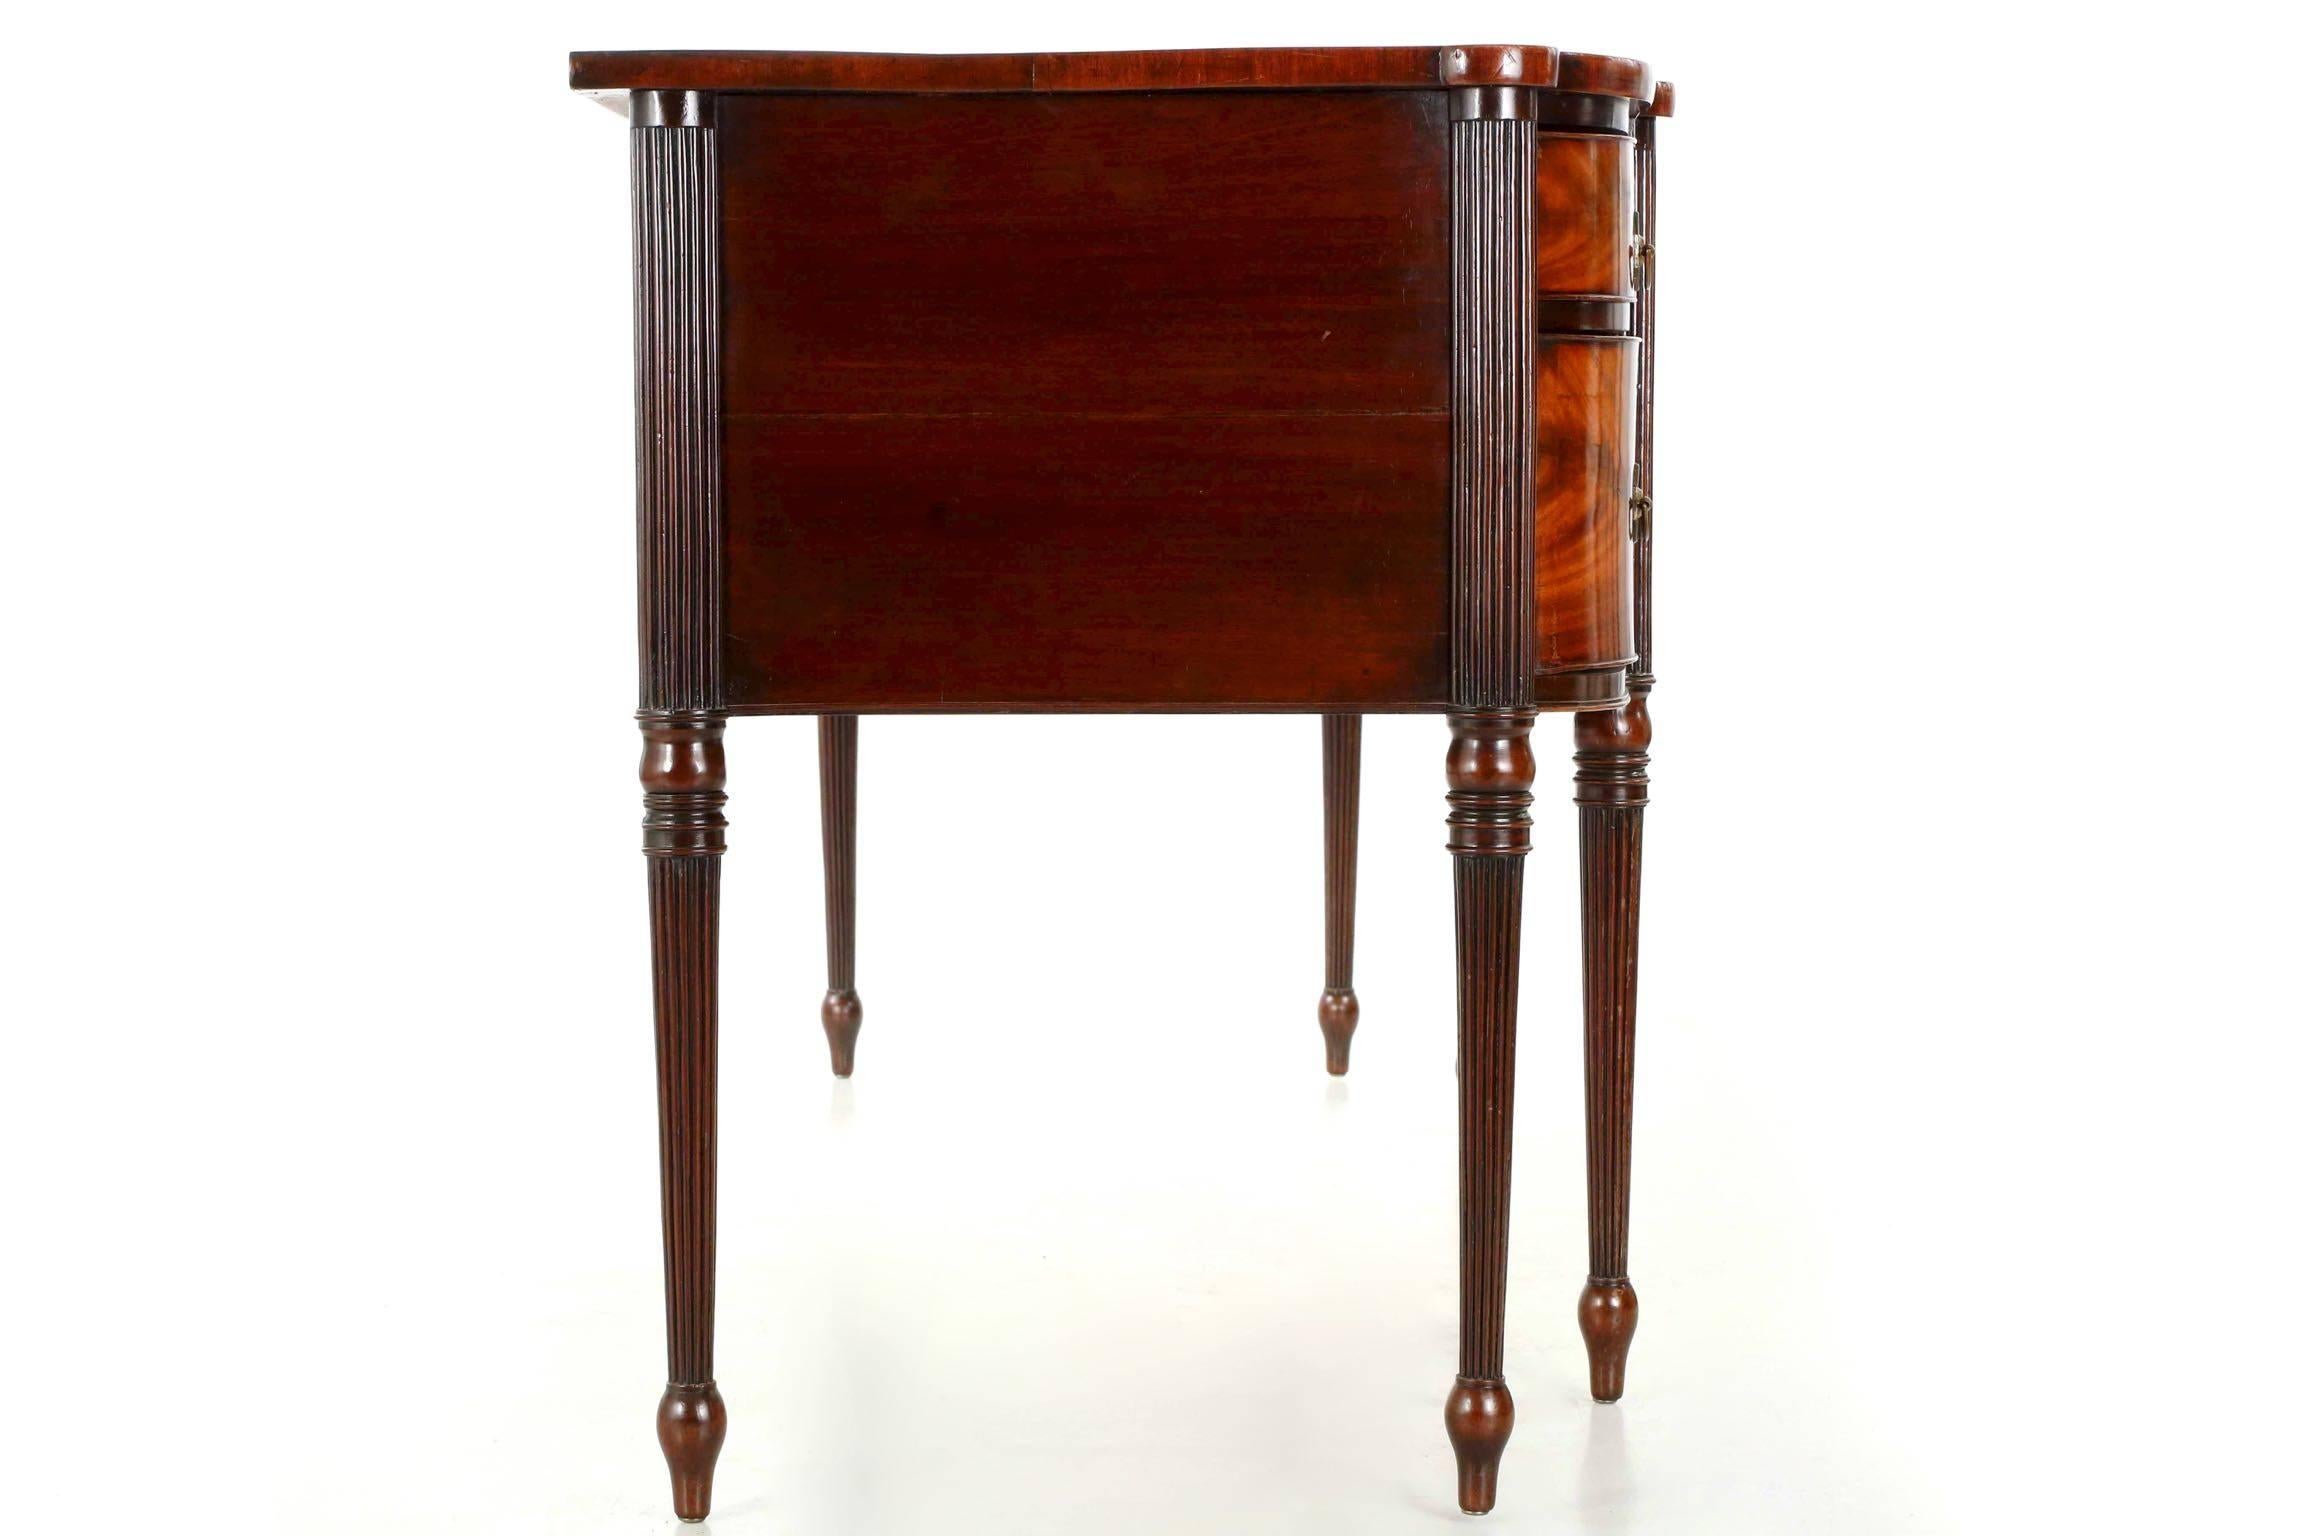 A most spectacular piece of early American craftsmanship, this very fine sideboard is closely related in form to works from the North Shore of Massachusetts and the Seymour school. It’s unusual length is particularly noteworthy, measuring a full 92